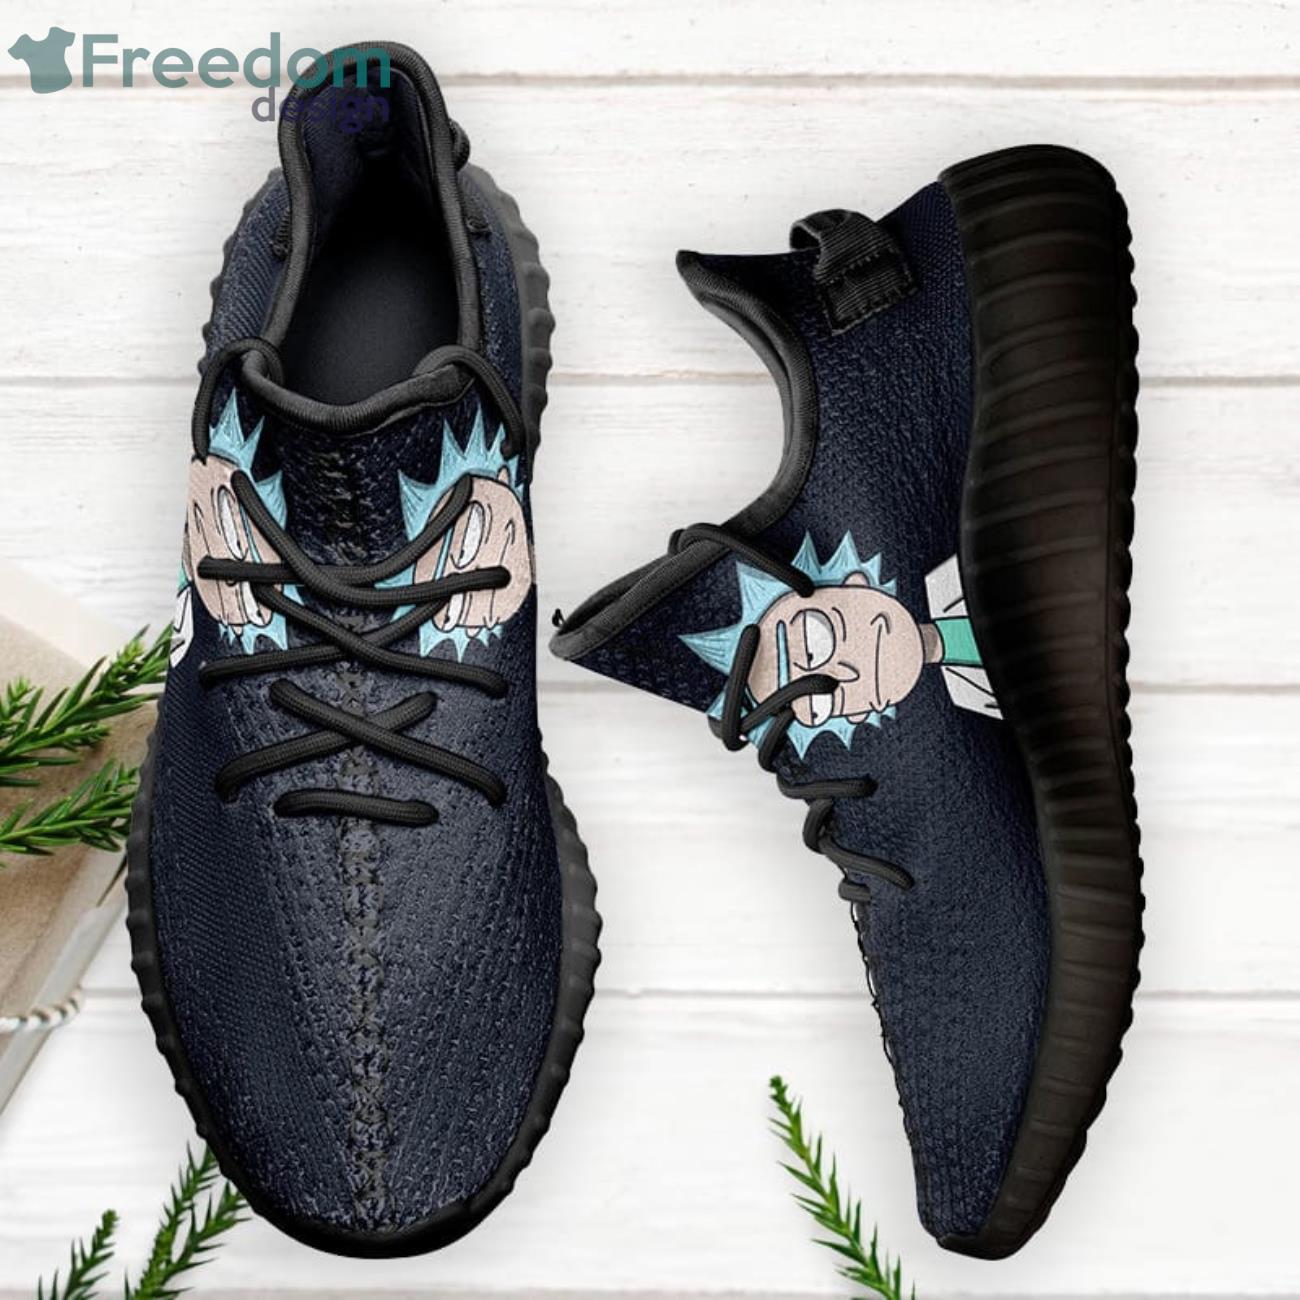 Louis Vuitton Rick And Morty Yeezy Boost Shoes Sport Sneakers